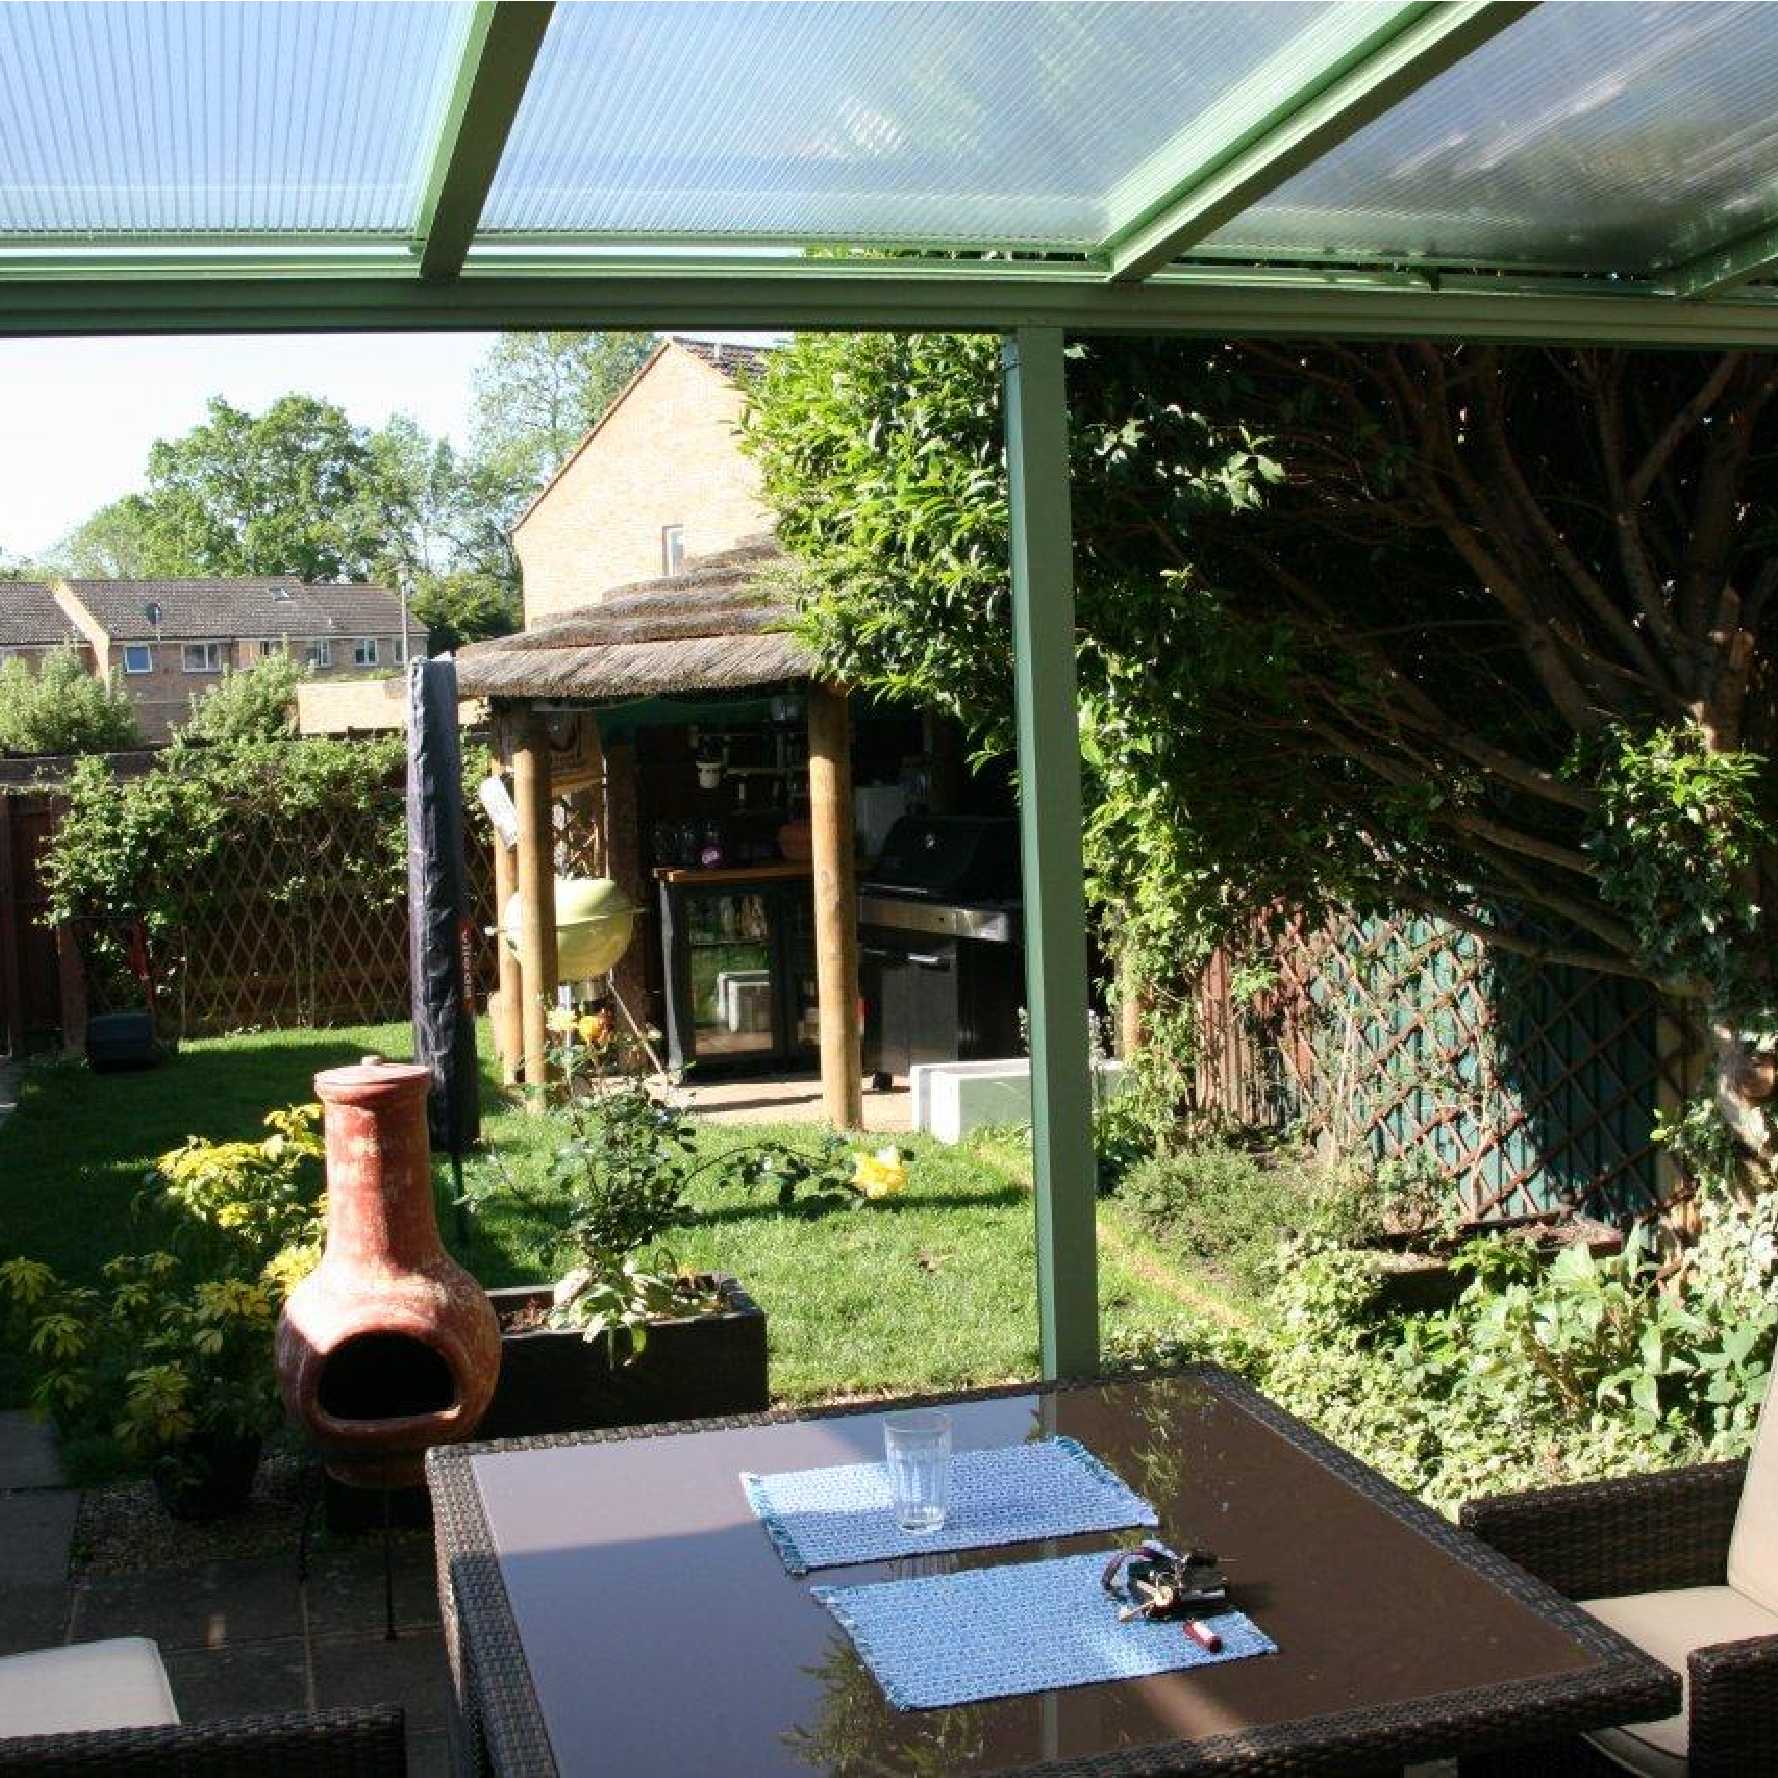 Affordable Omega Smart Lean-To Canopy, White with 16mm Polycarbonate Glazing - 6.3m (W) x 4.0m (P), (4) Supporting Posts